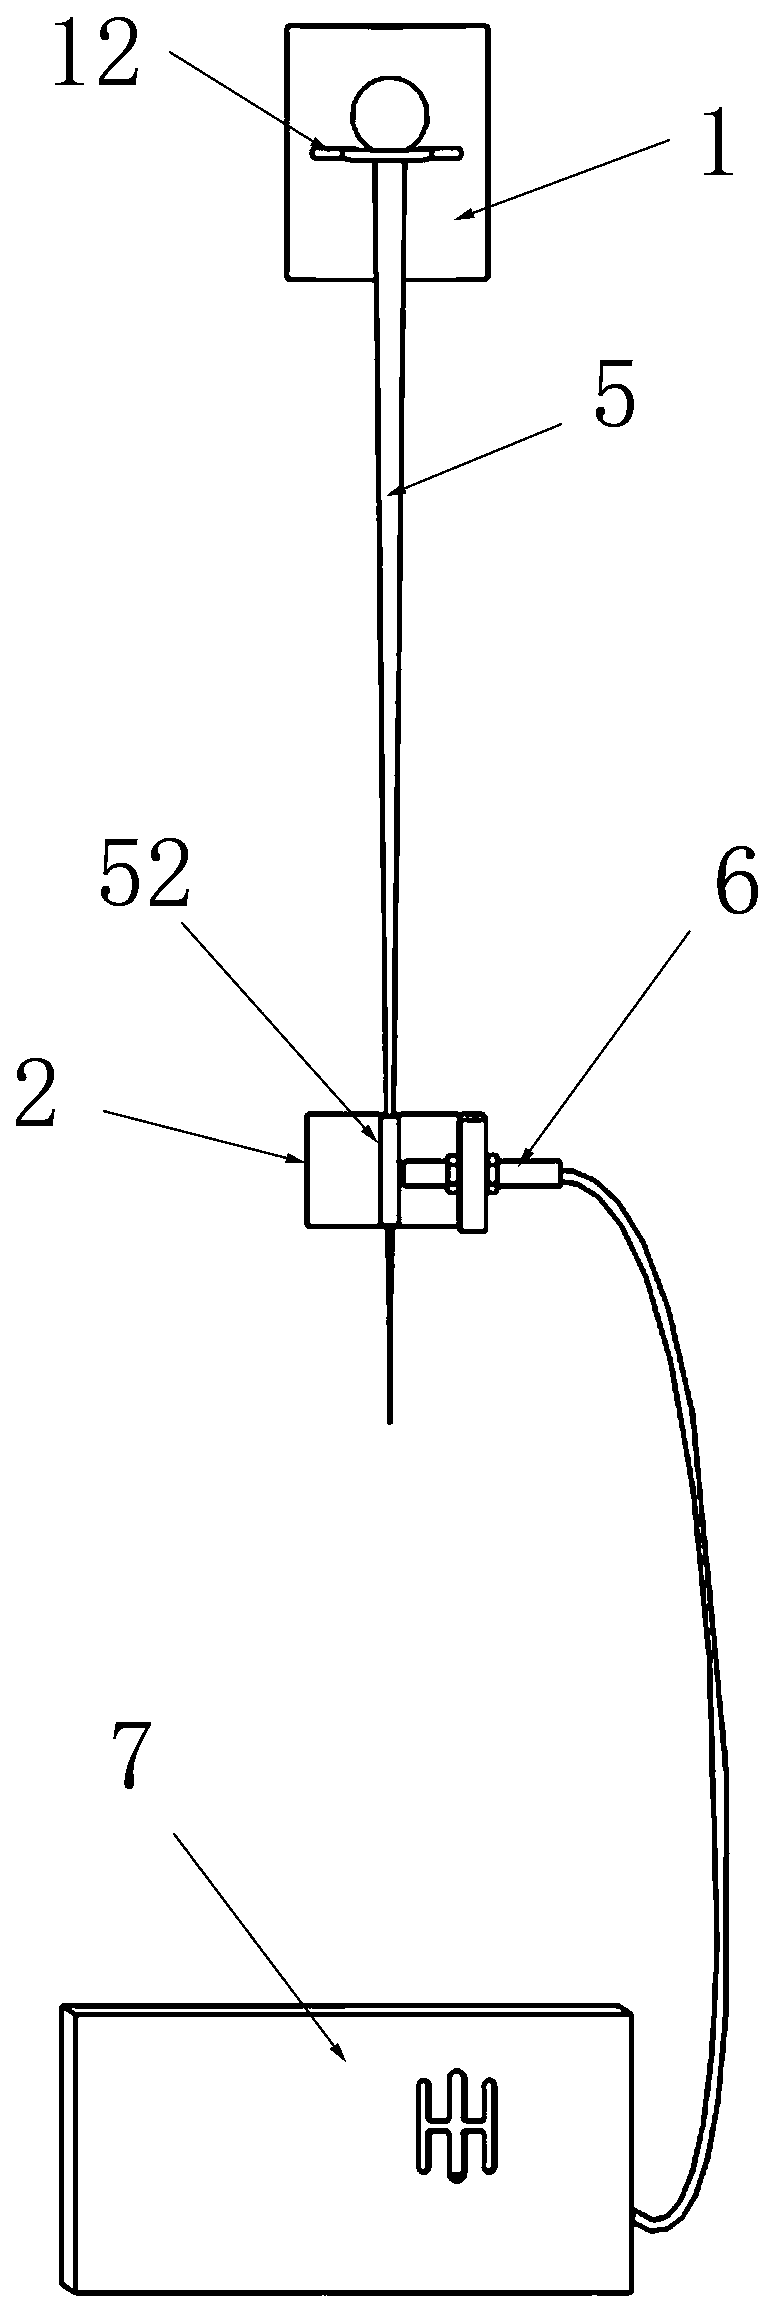 Device for monitoring looseness of tower body bolt of tower crane